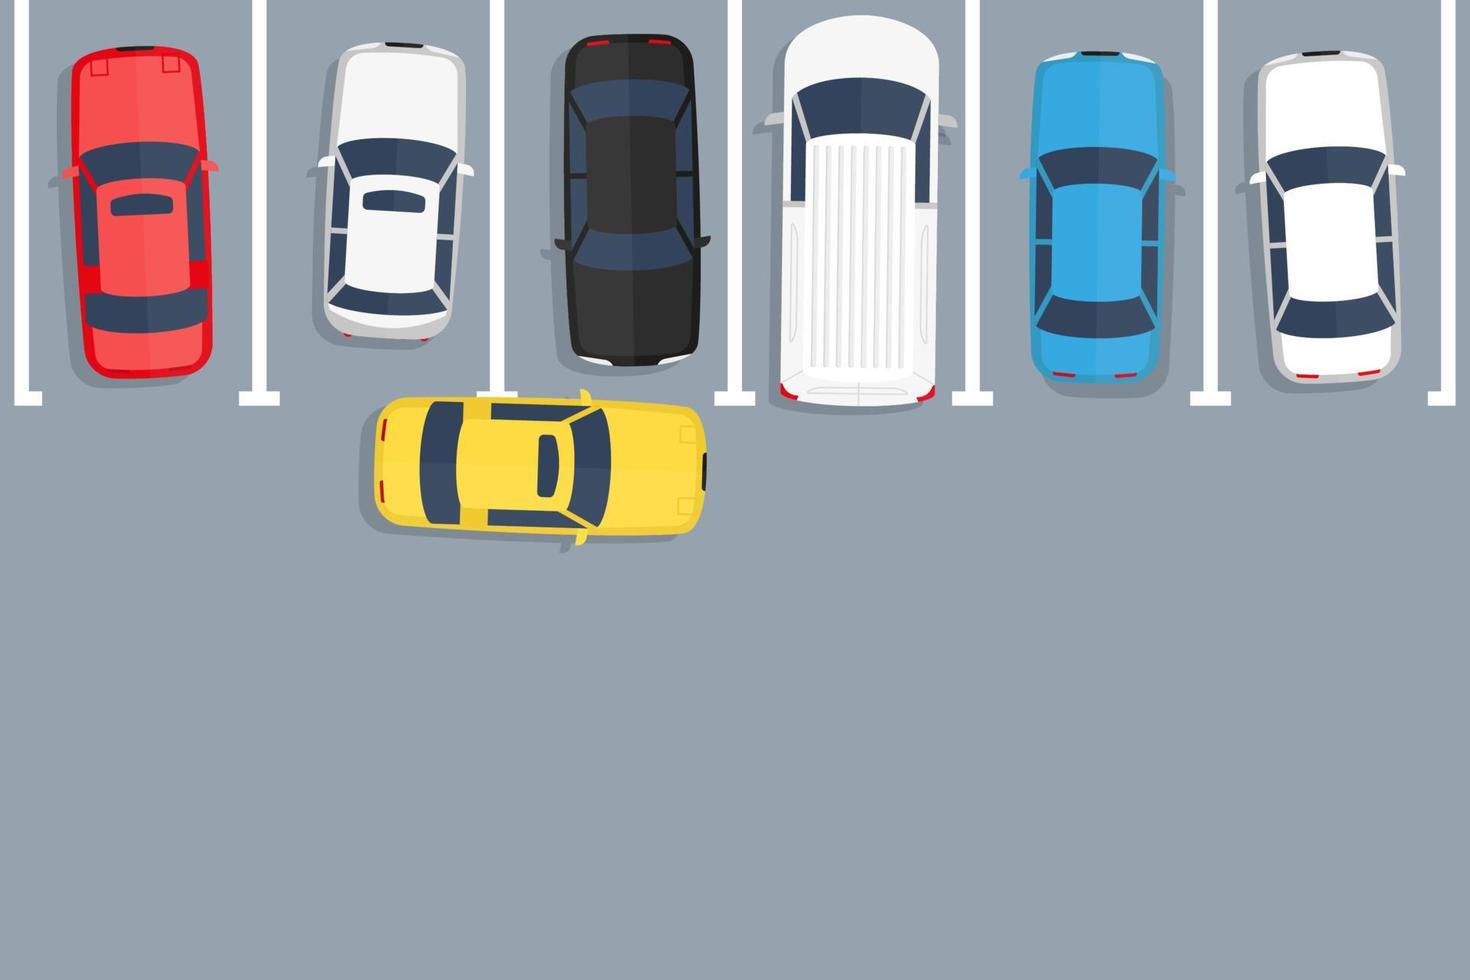 Bad parking. blocked the exit of another car. Vector in flat design top view